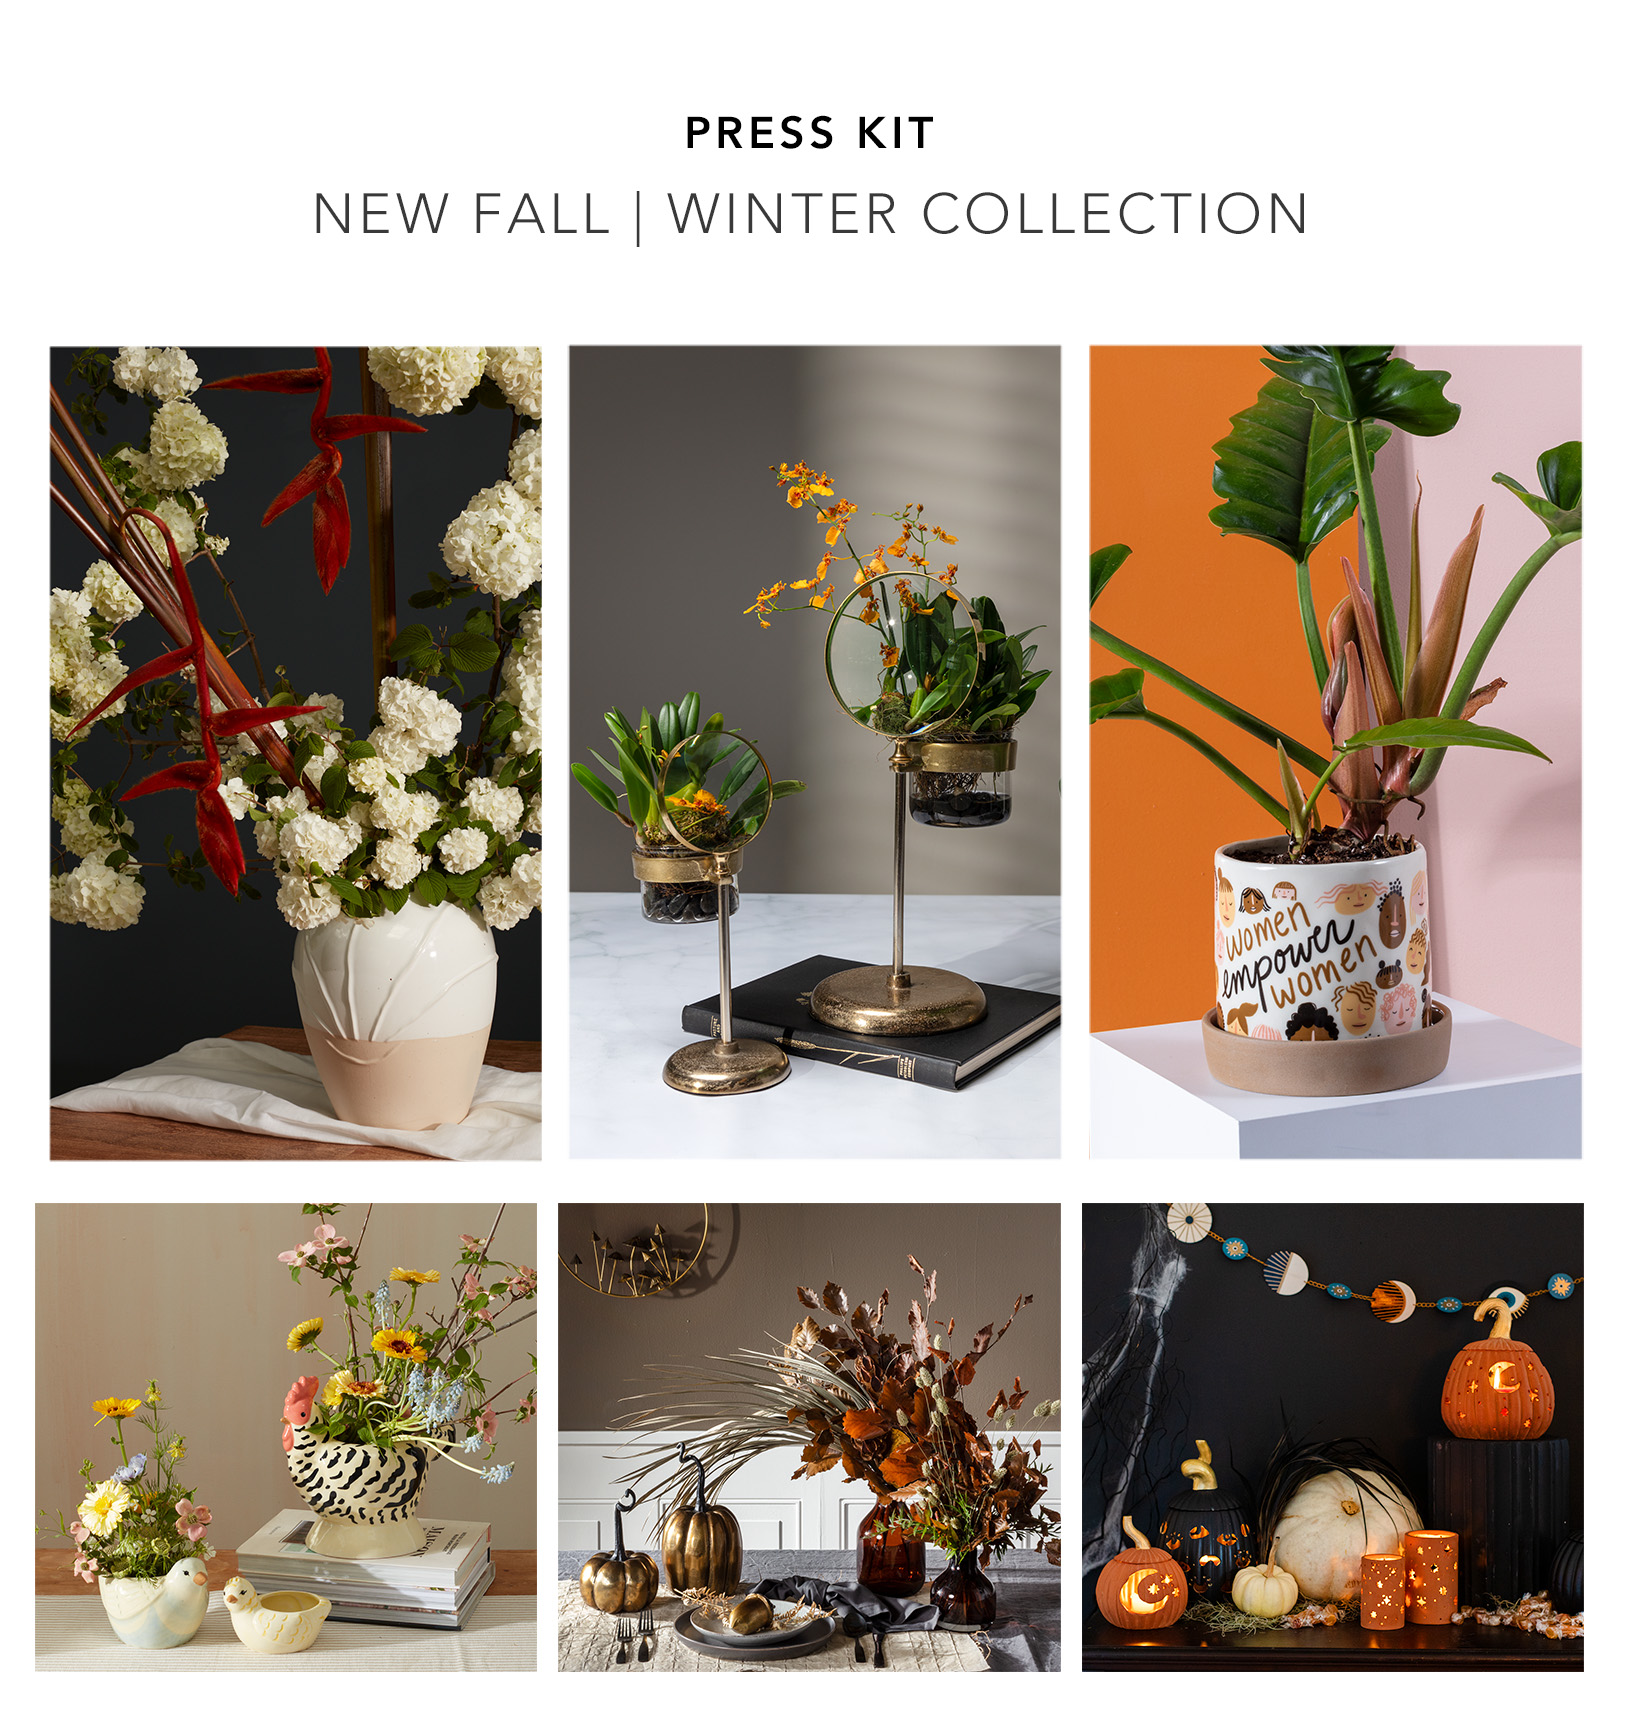 Accent Decor Press Kit New Spring | Summer Collection